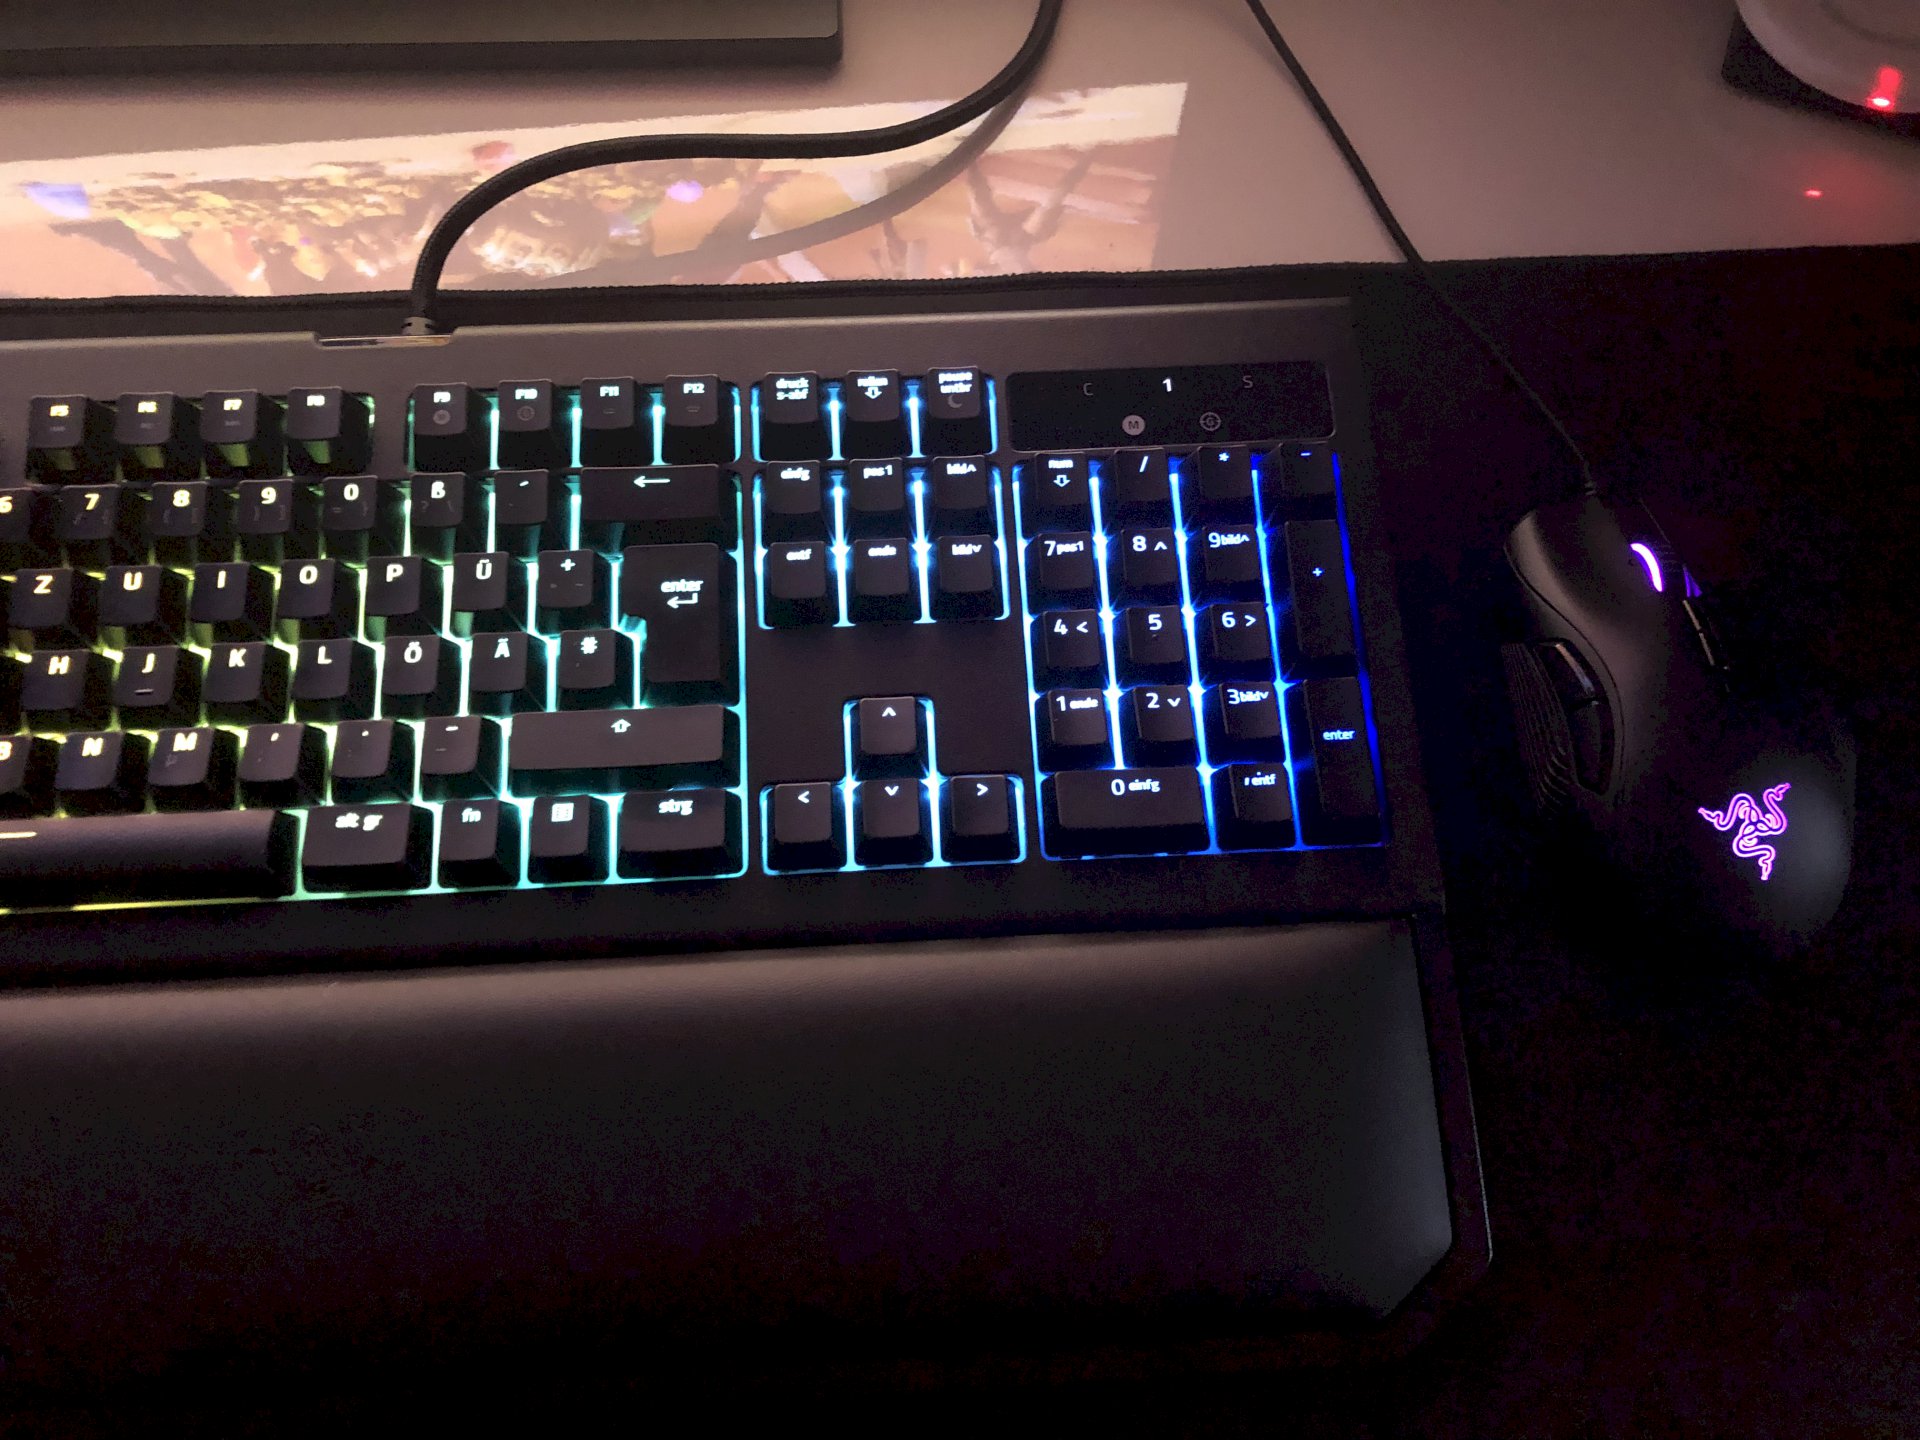 How To Have Color On Keyboard For Fortnite Razer Blackwidow Chroma V2 Changes Color When I Go Into A Game Fortnite Re Fortnite